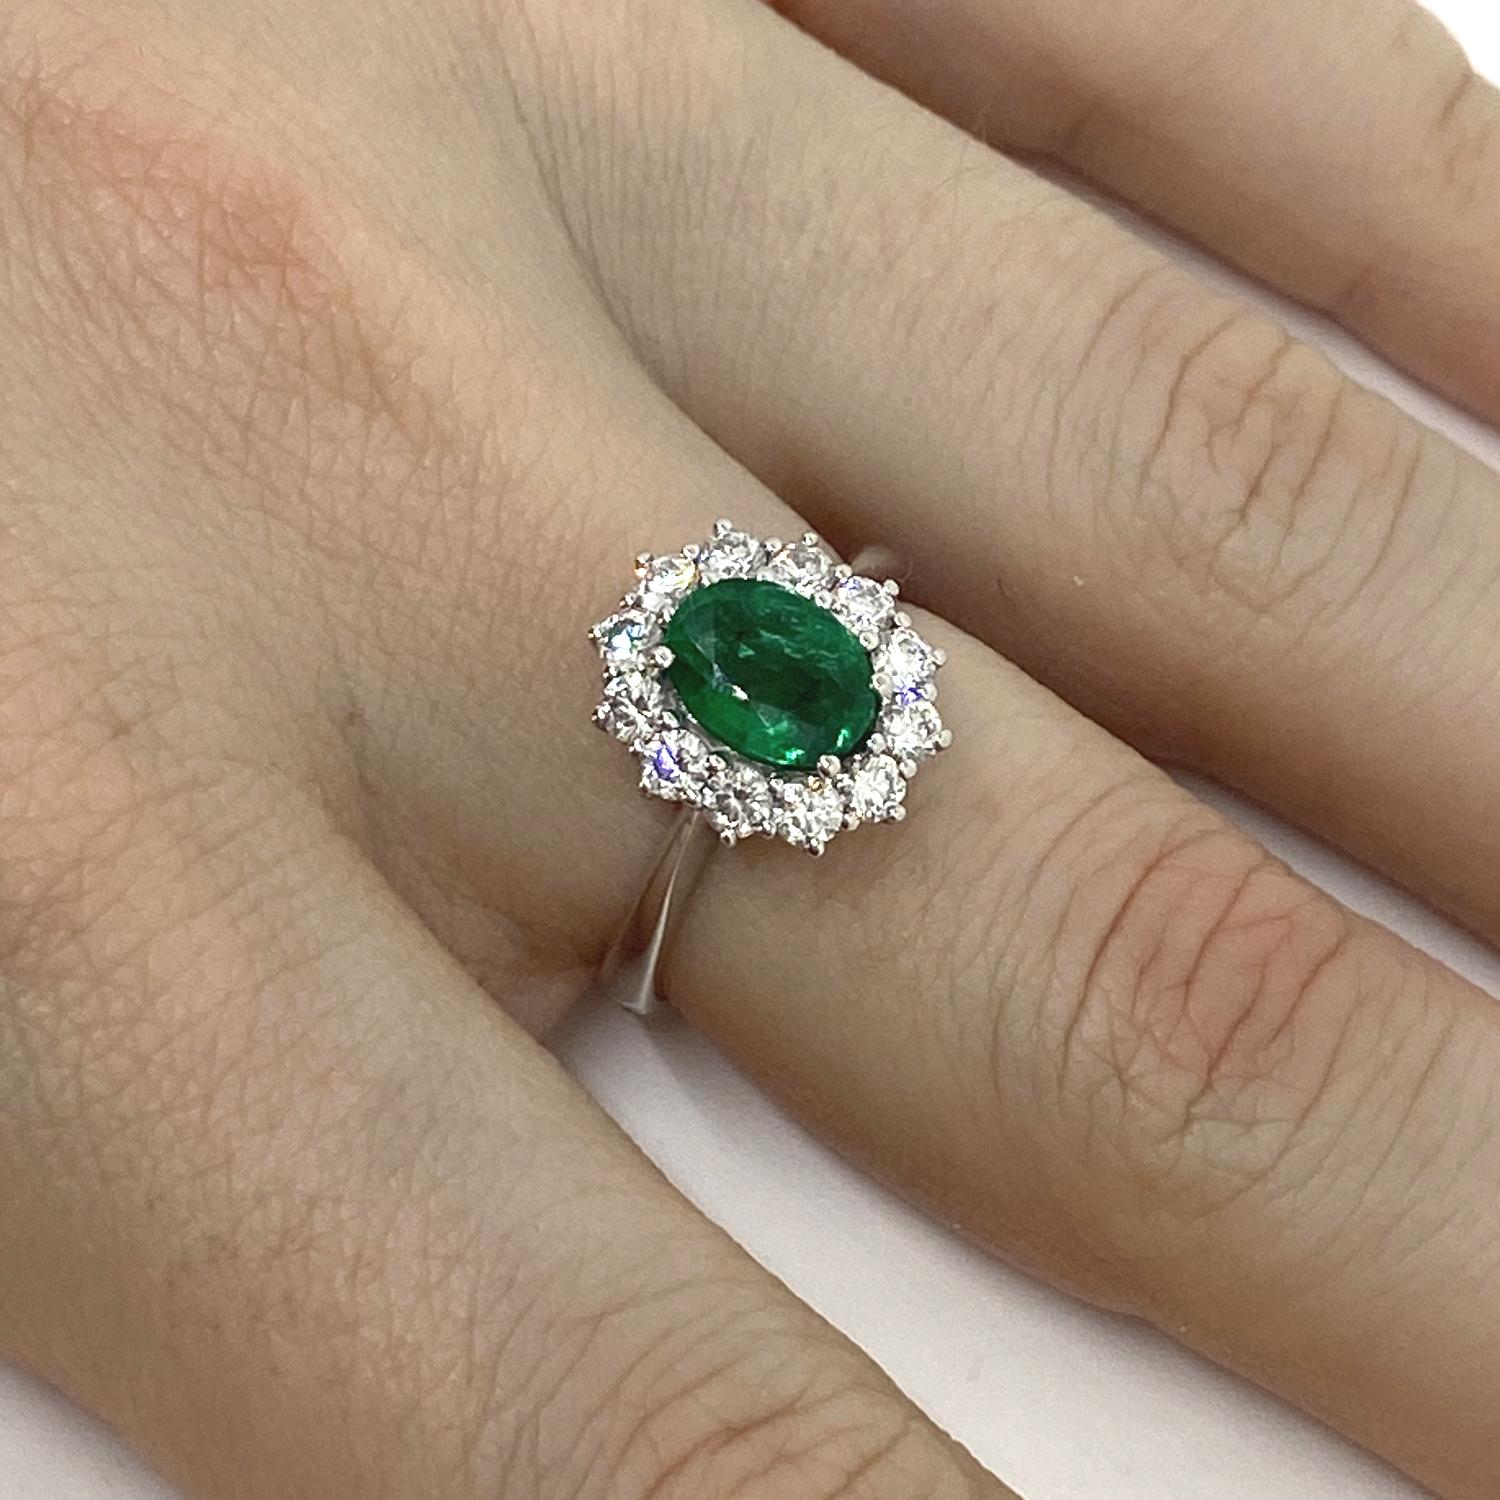 Ring made of 18kt white gold with natural white brilliant-cut diamonds for ct.0.72 and natural oval-cut emerald for ct .1.15
-------------------------------------------------

Important Note : In order to speed up the publishing process of our vast